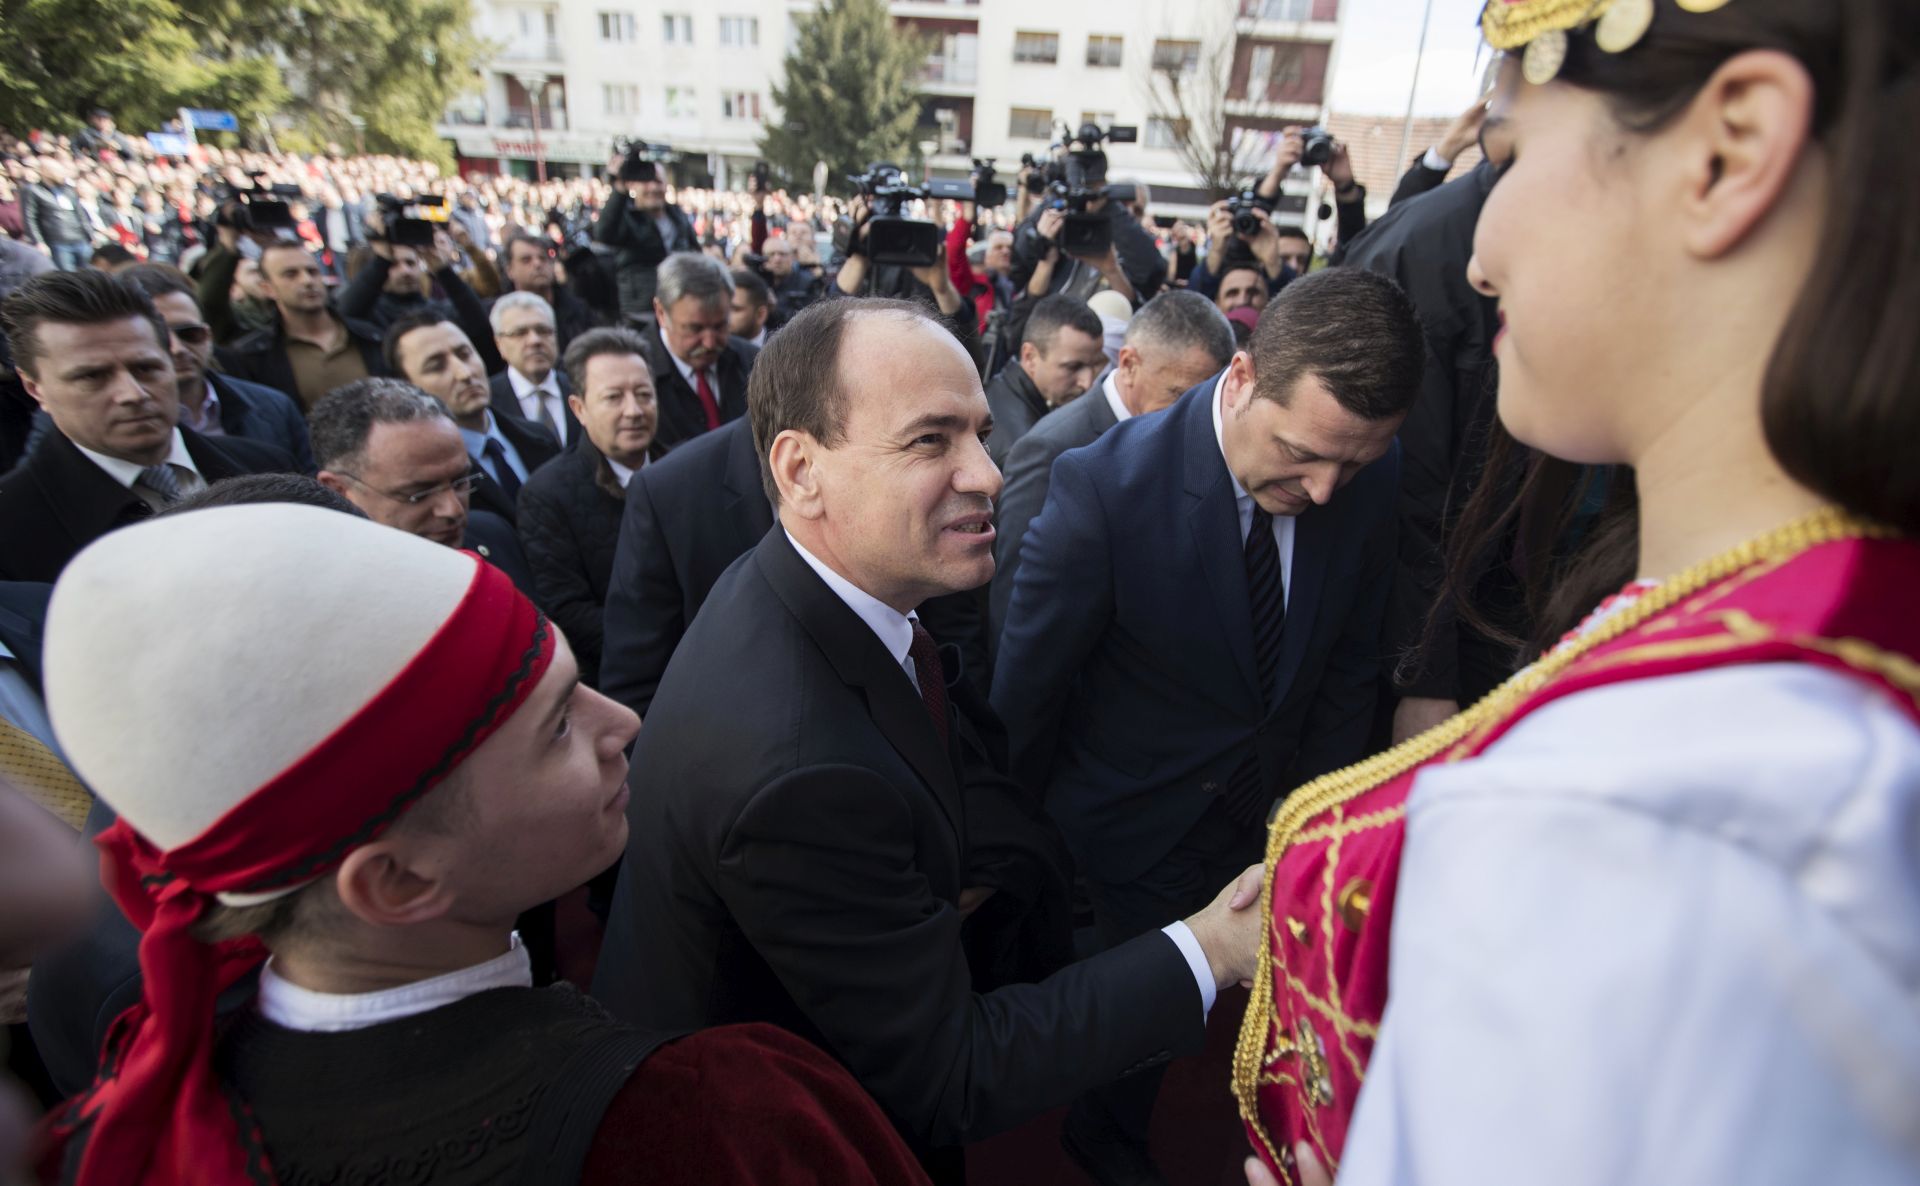 epa05834379 President of the Republic of Albania Bujar Nishani (C) greets local Albanians during his visit in the town of Bujanovac, Serbia, 07 March 2017. This is the first visit of an Albanian President to Serbia in 69 years. Albania's first president to visit Serbia was late dictator Enver Hoxha in 1948. President Bujar Nishani is visiting the Presevo Valley on the occasion of marking the 130th anniversary of the first Albanian School and Teachers Day.  EPA/VALDRIN XHEMAJ